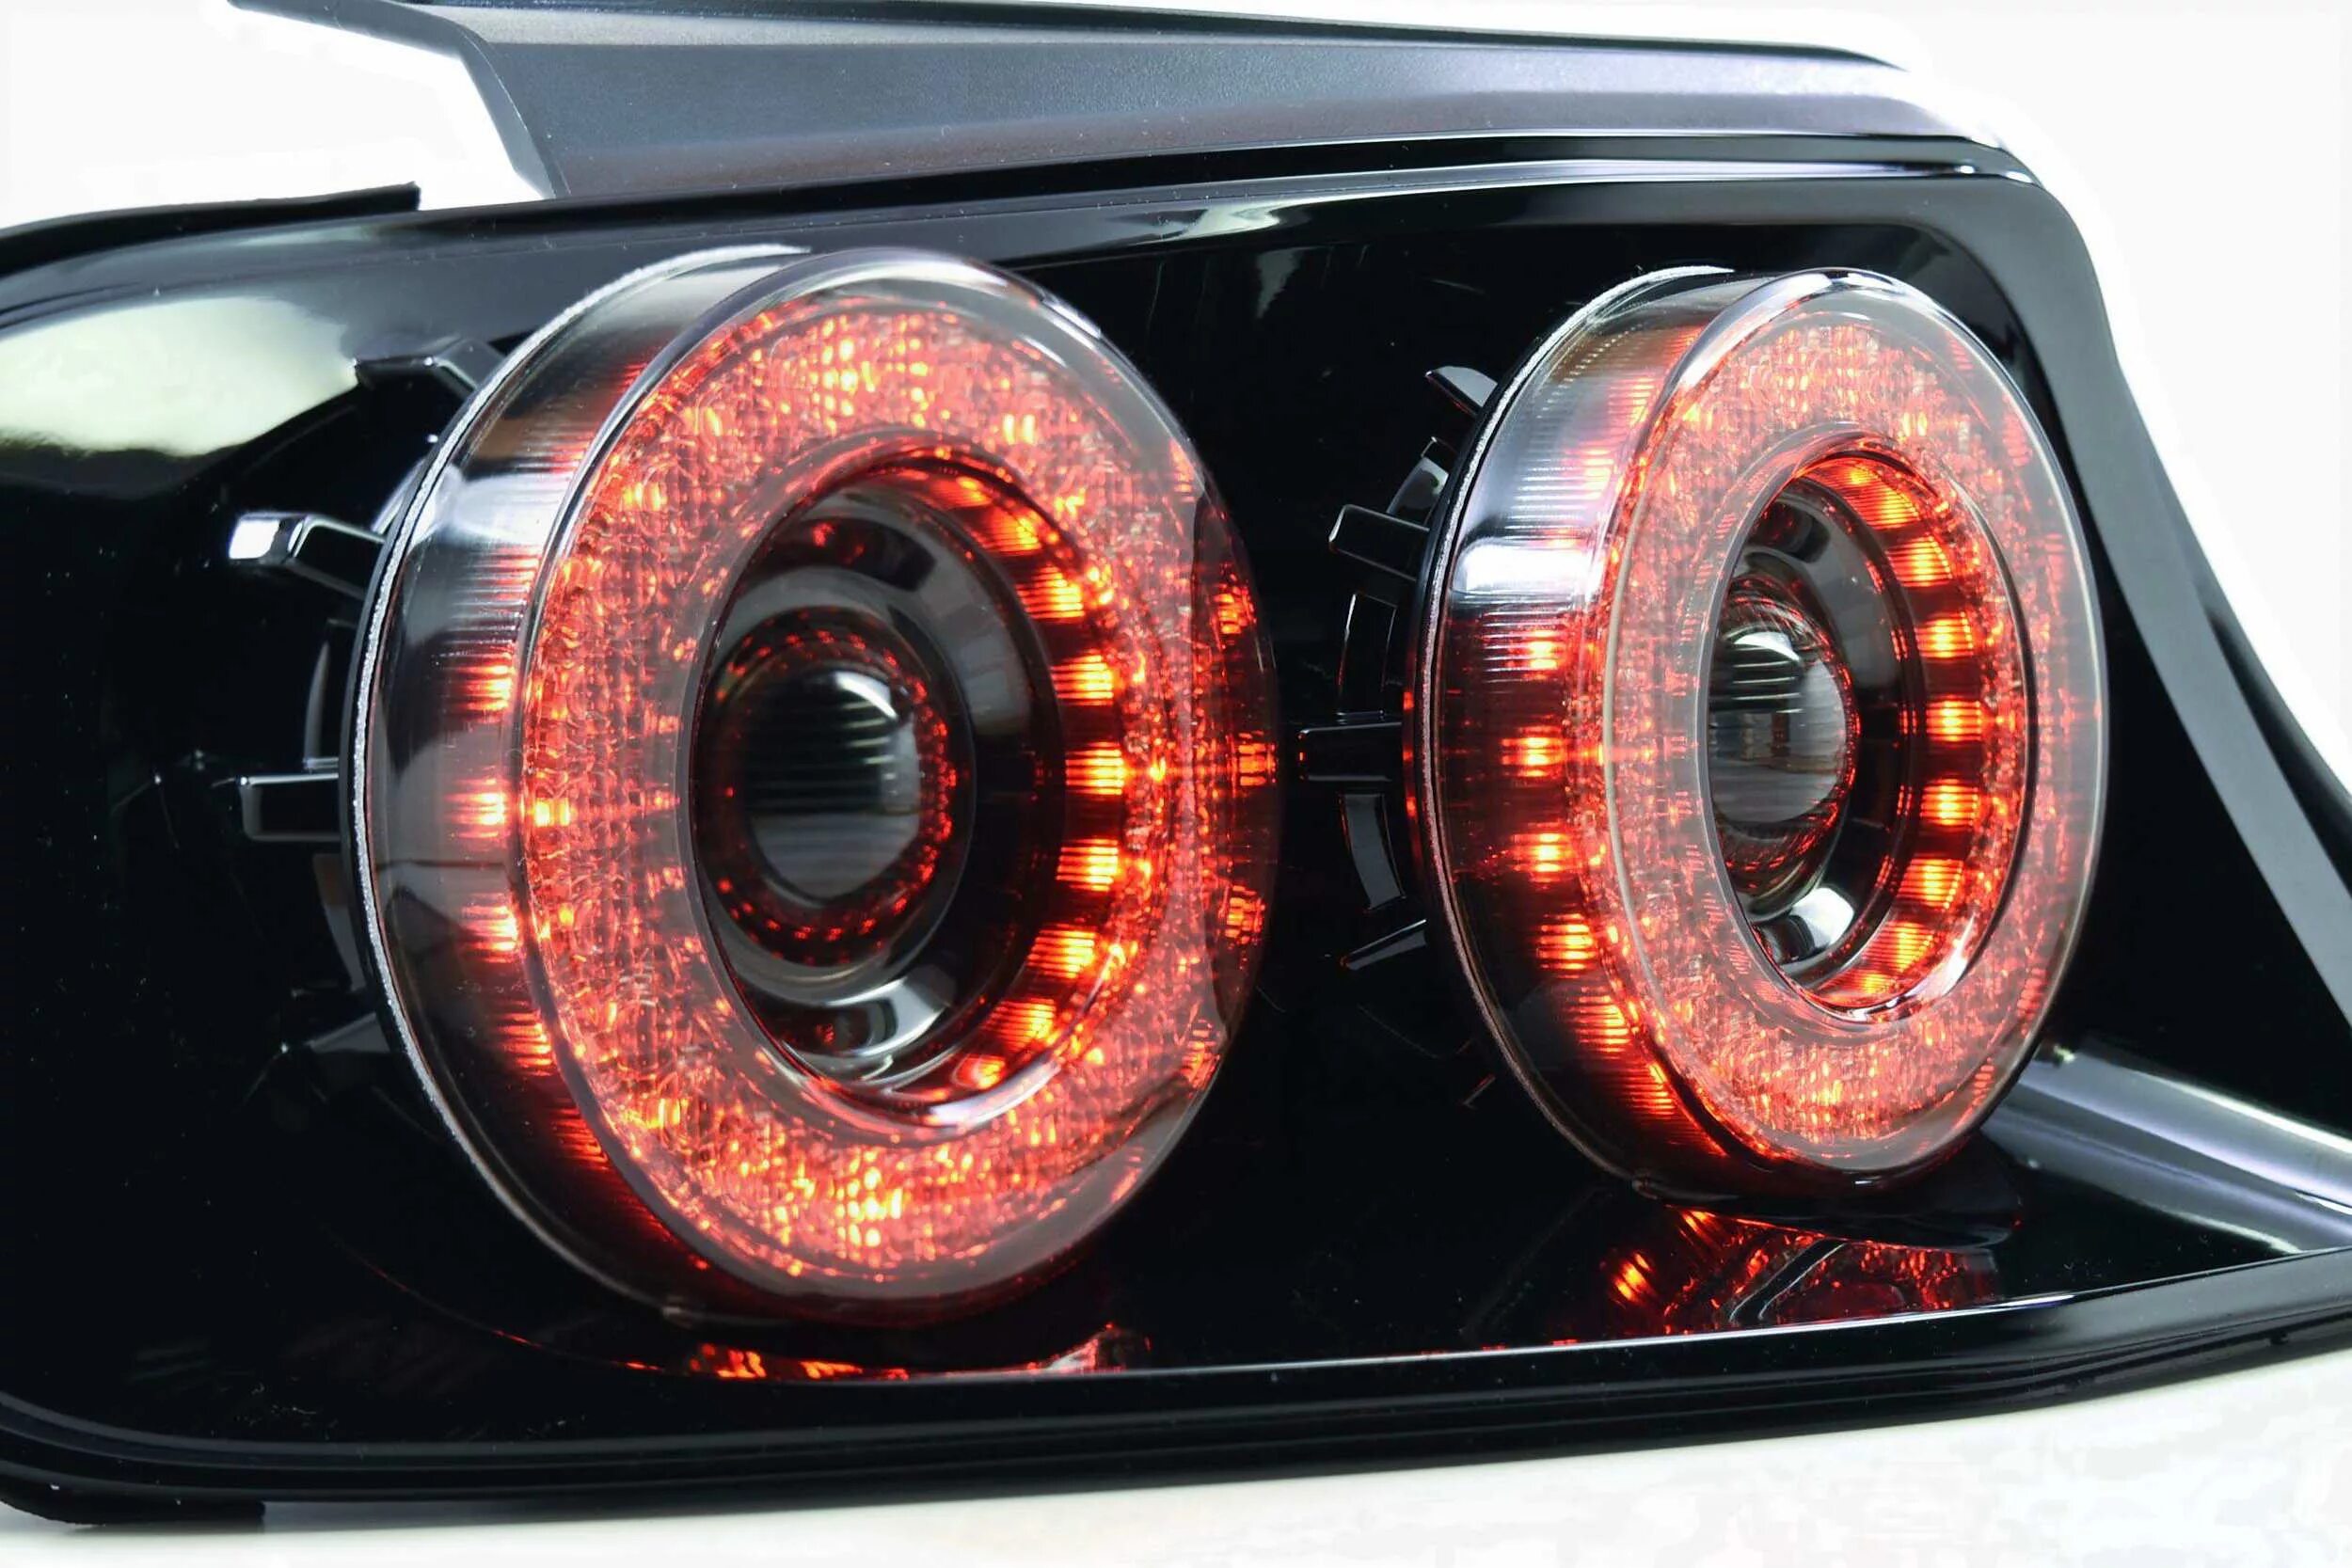 Мустанг фары. Задние фонари Ford Mustang. Ford Mustang: Morimoto XB led taillights. Задние фонари Mustang 6. Задние фонари Форд Мустанг.